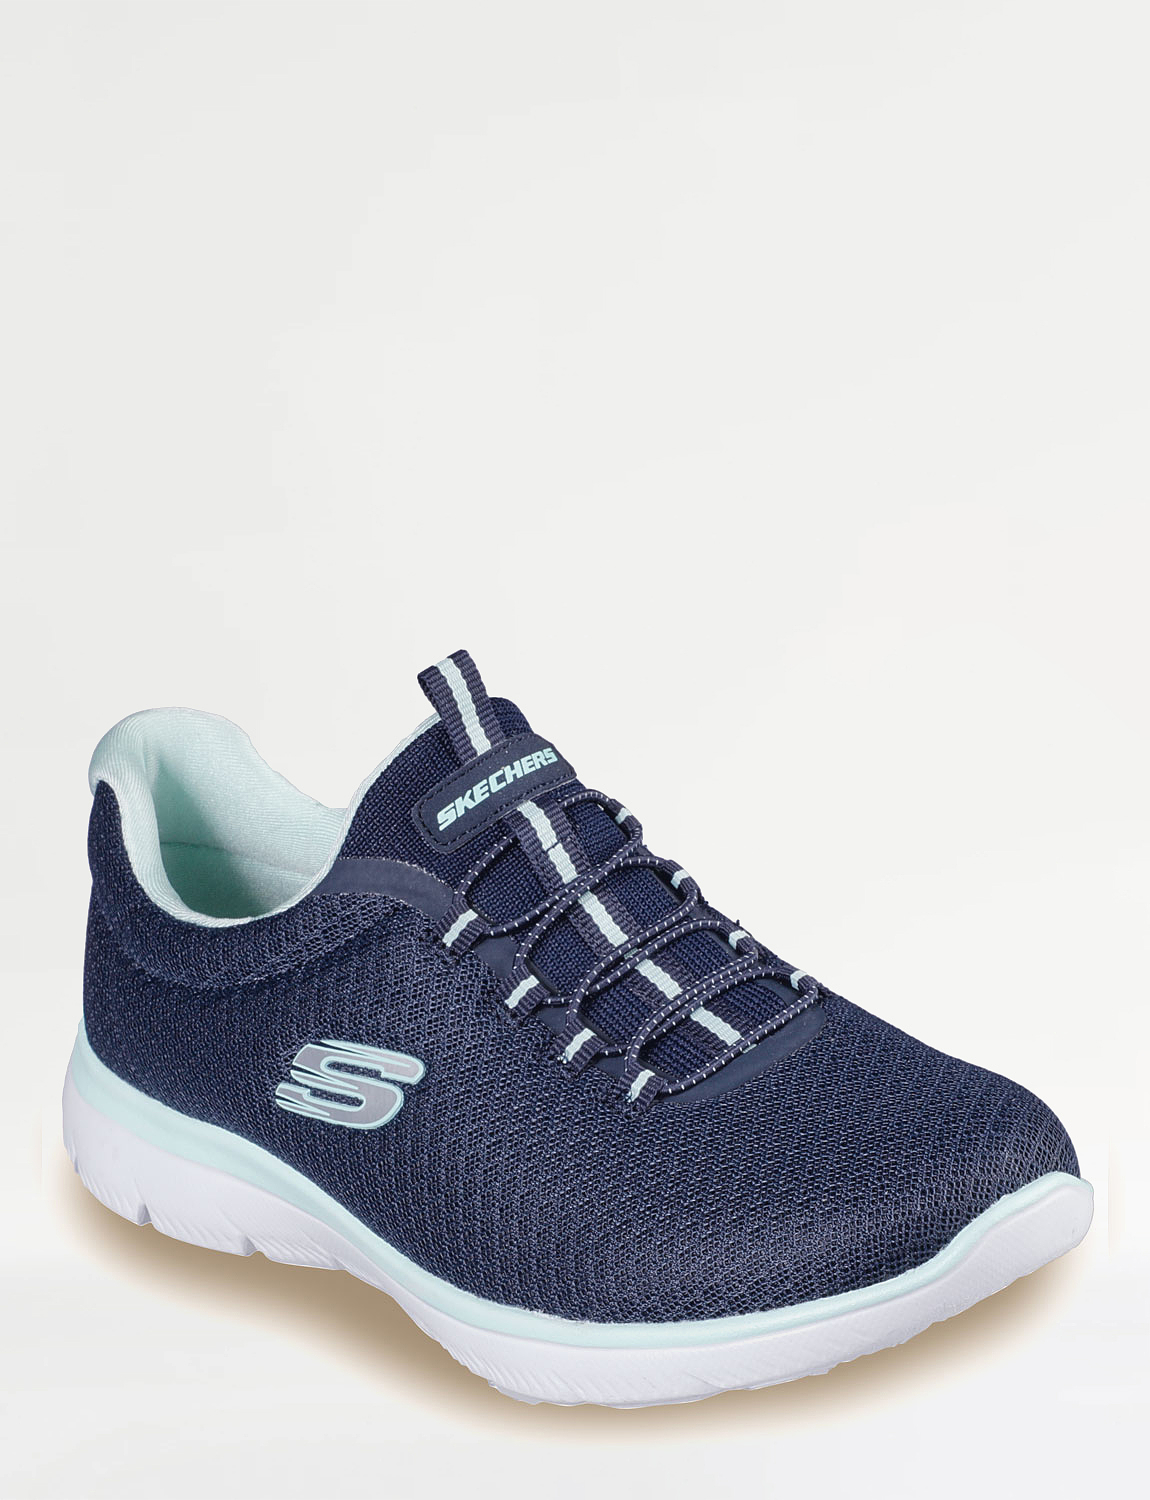 skechers shoes wide fit